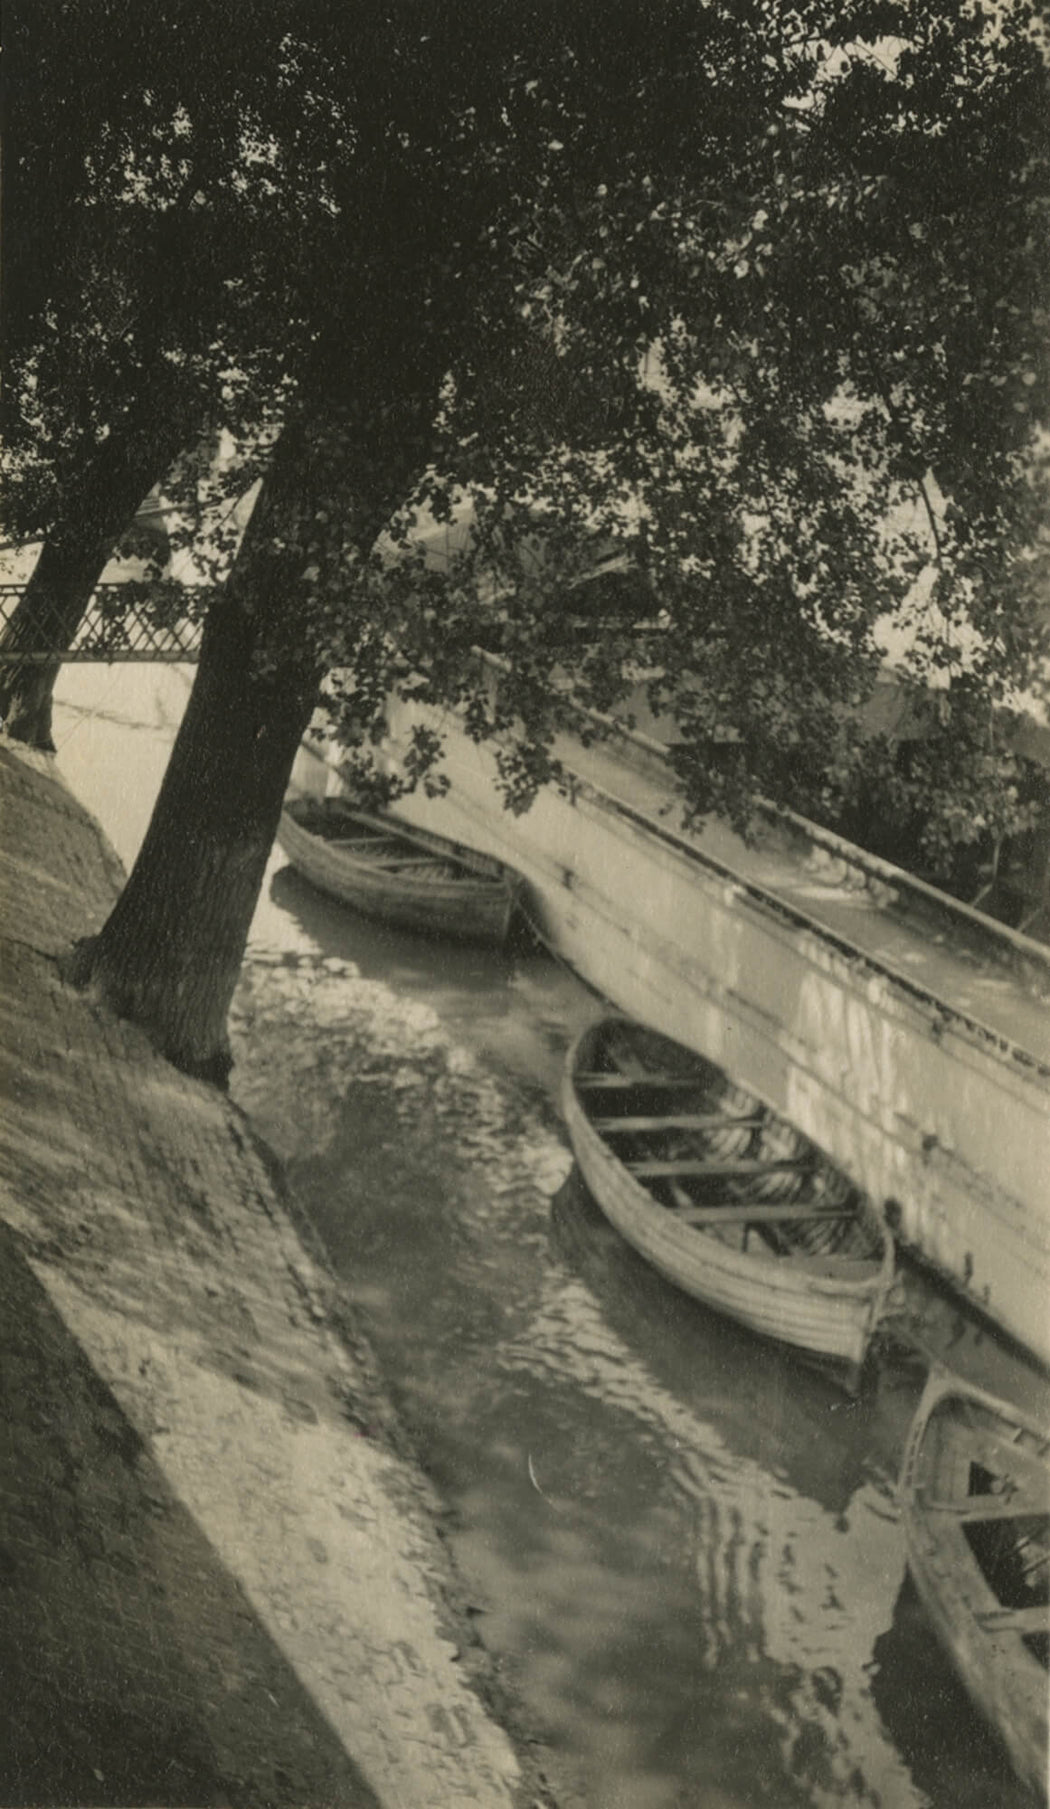 Untitled [Boats on the Seine], Paris